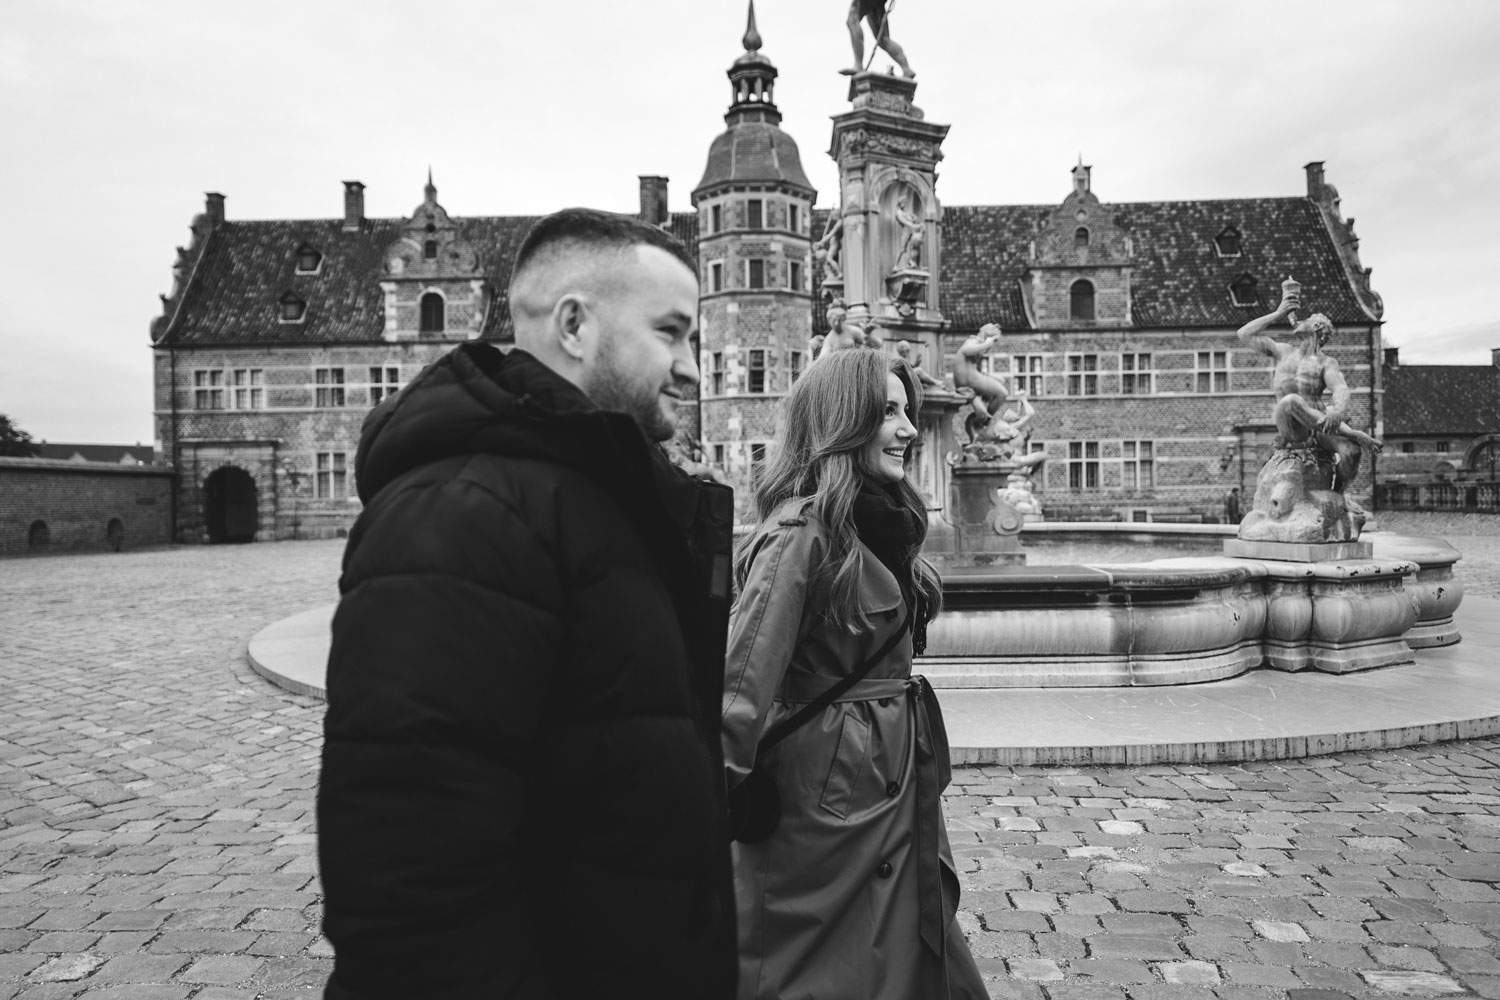 Couple's special moment at Frederiksborg Castle